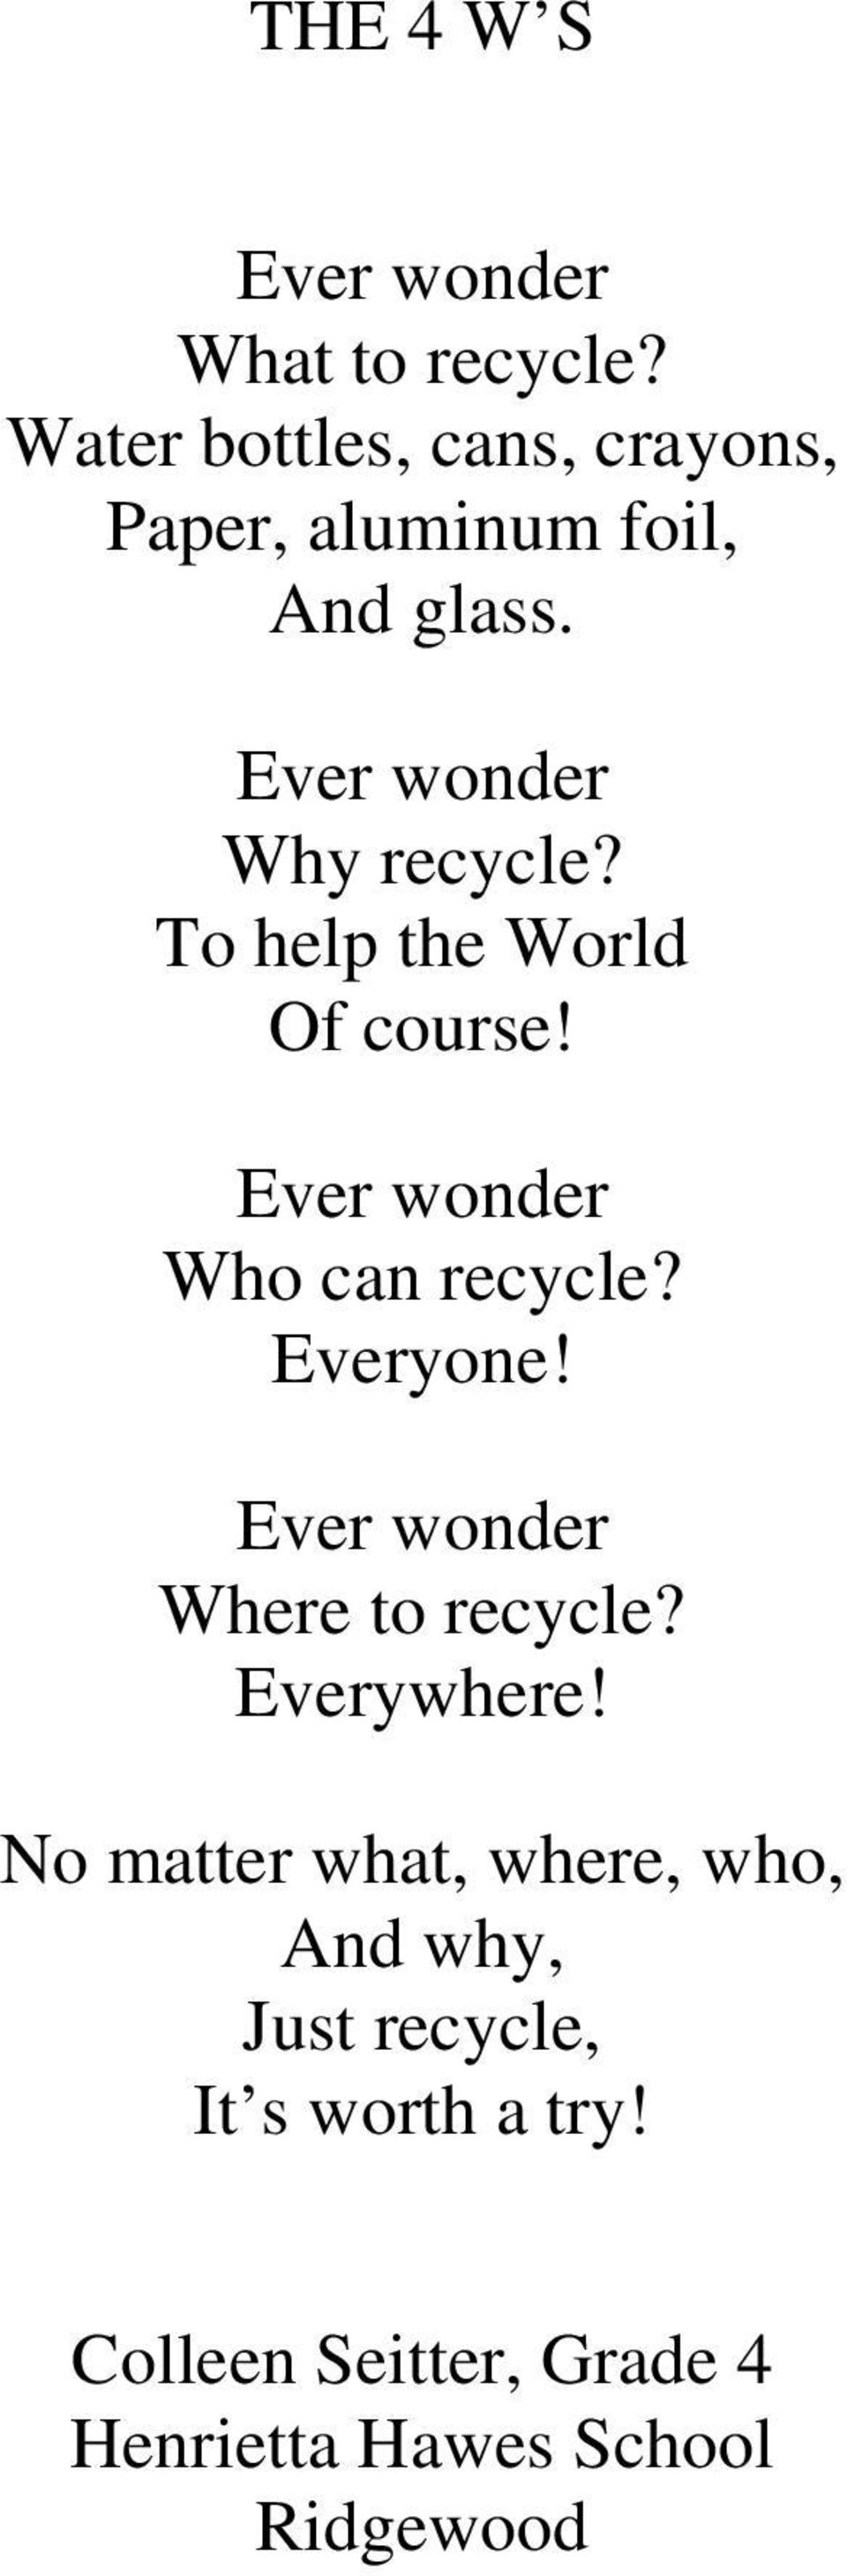 To help the World Of course! Ever wonder Who can recycle? Everyone!